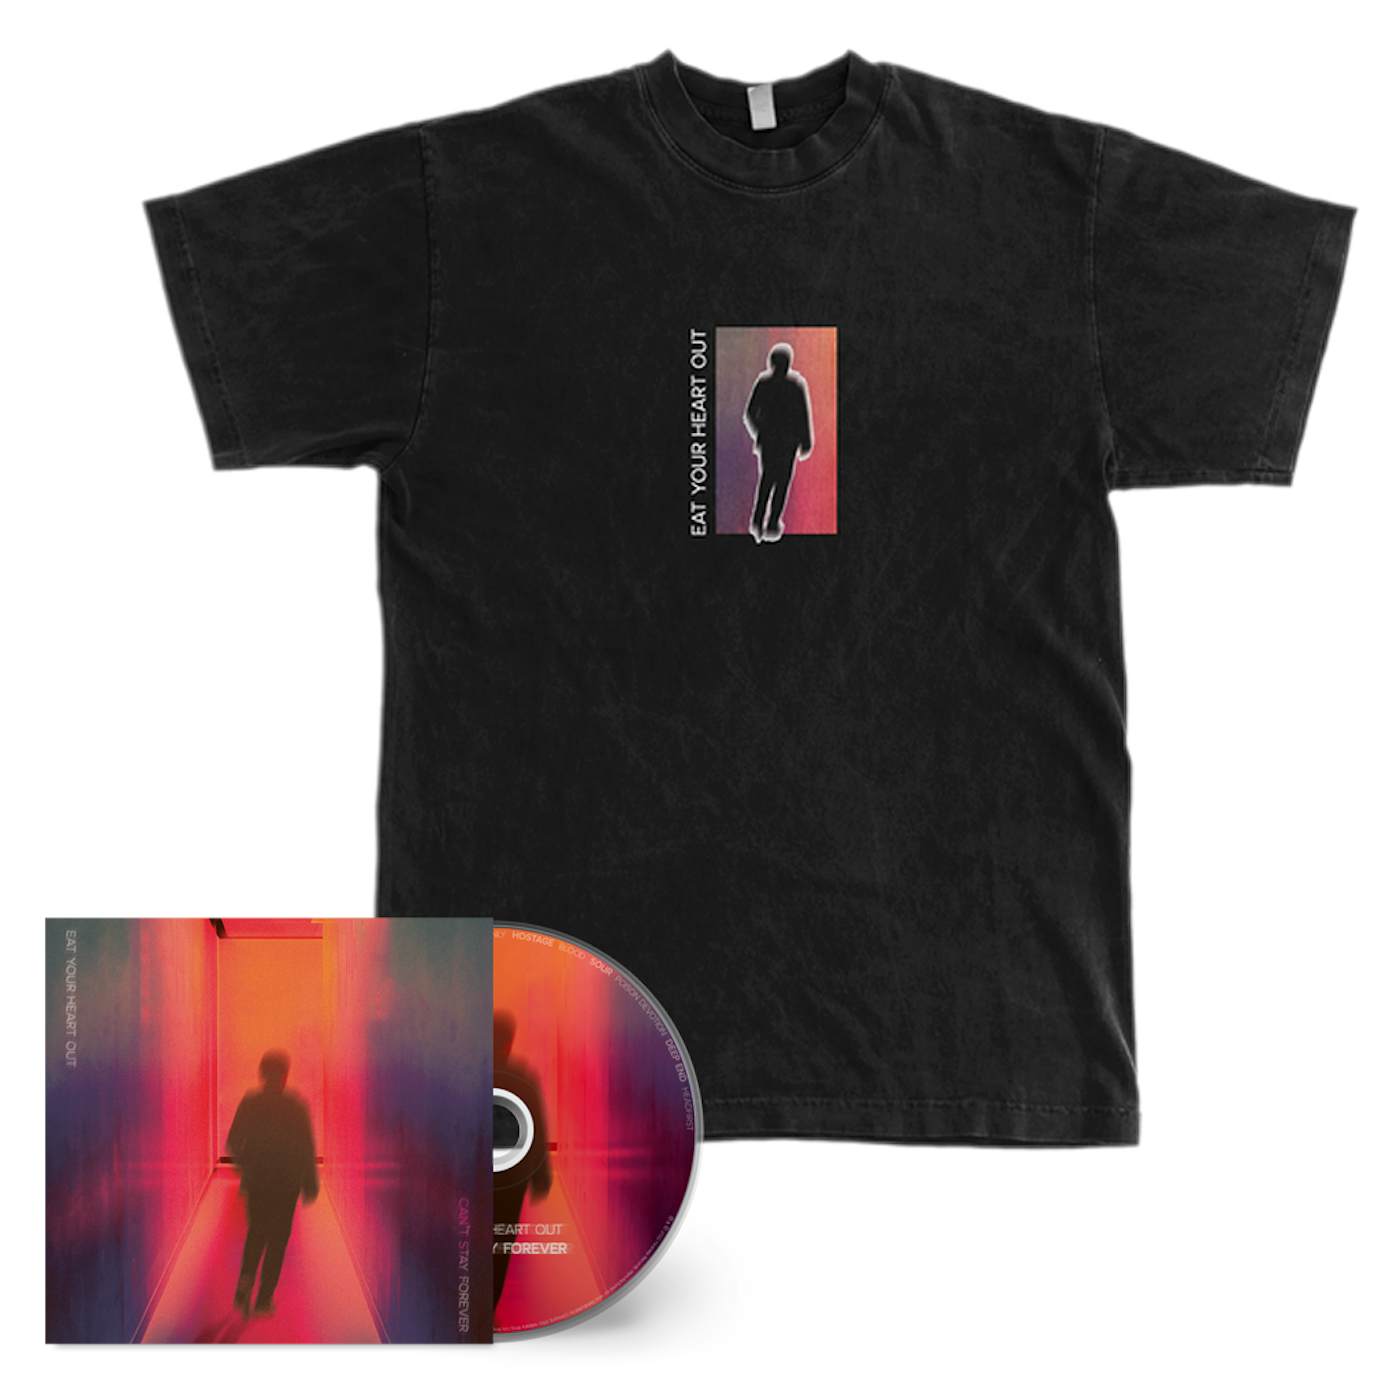 Eat Your Heart Out Can't Stay Forever CD + Tee (Black)